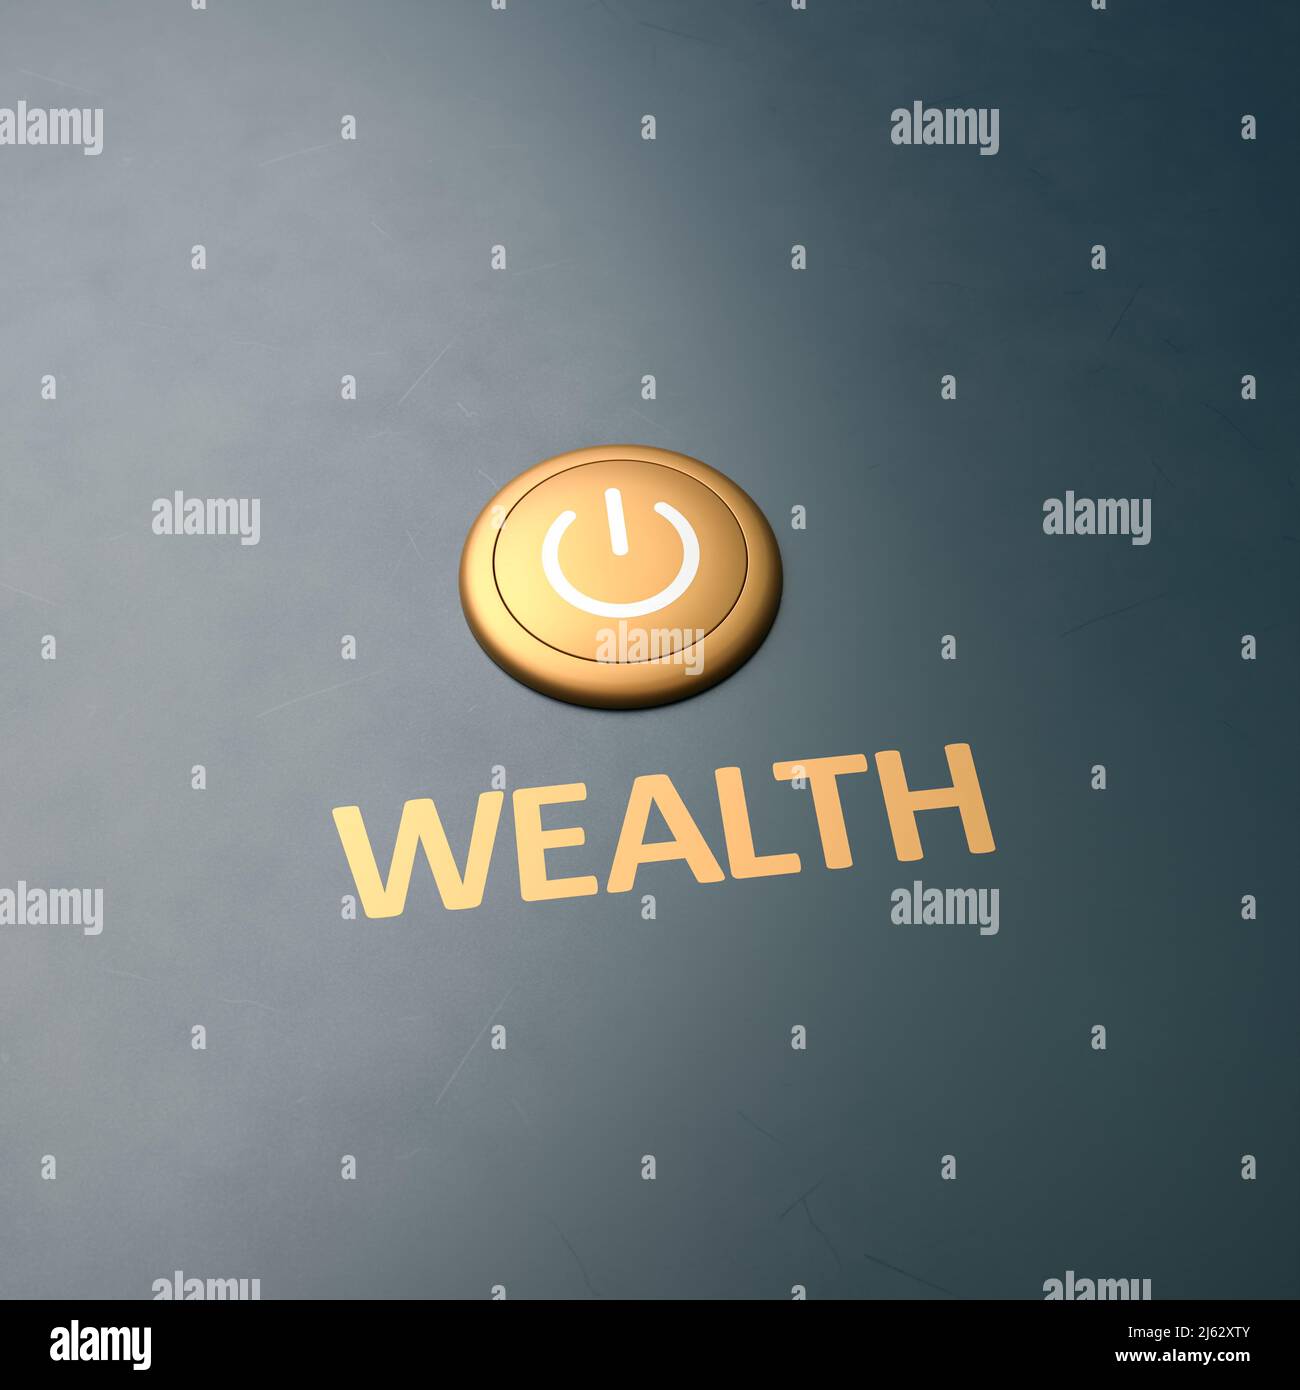 Golden button with the word 'wealth' as a label - concept for getting wealthy. Copy space around for better cropping Stock Photo